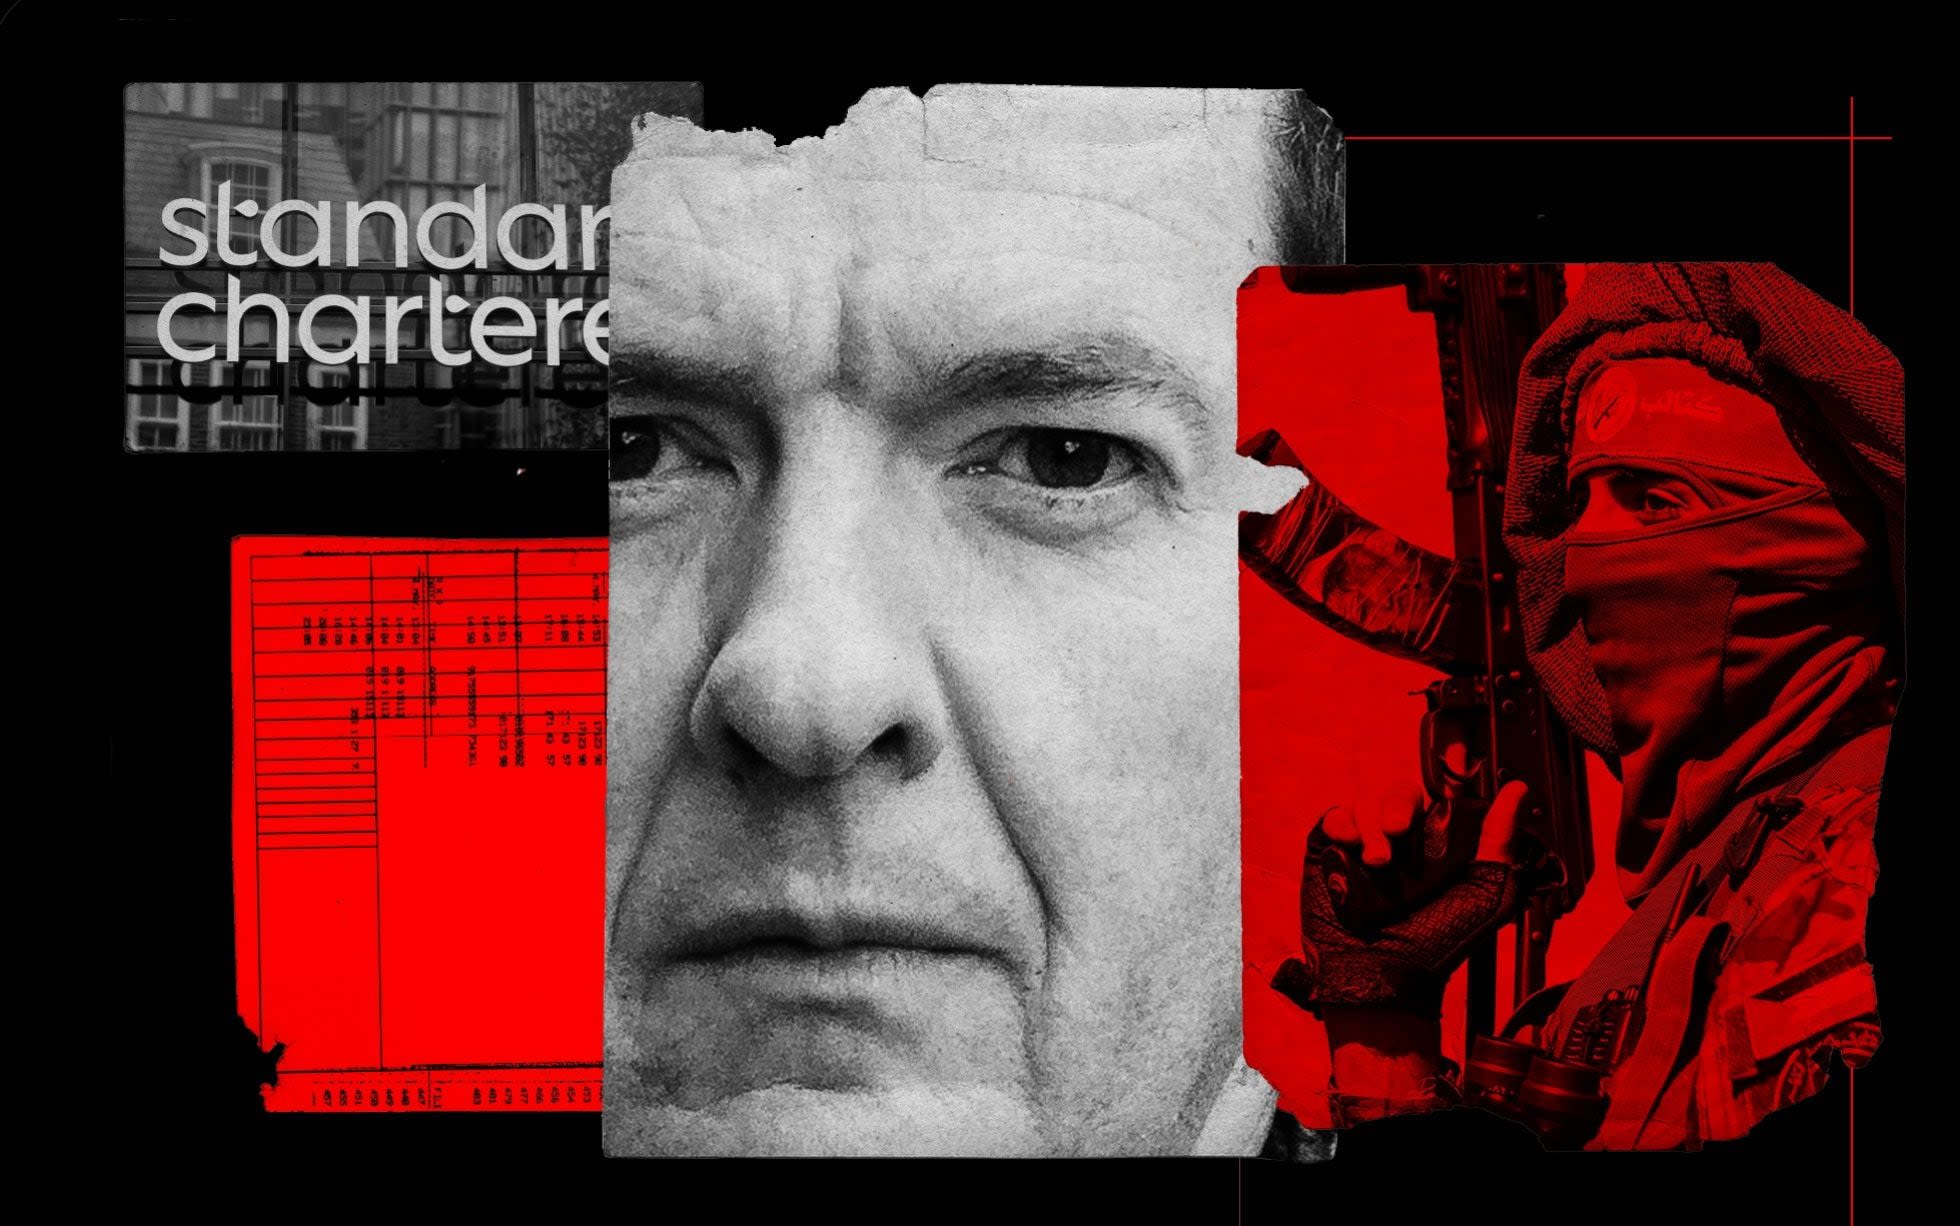 George Osborne’s support of Standard Chartered in question after Hamas financing claims